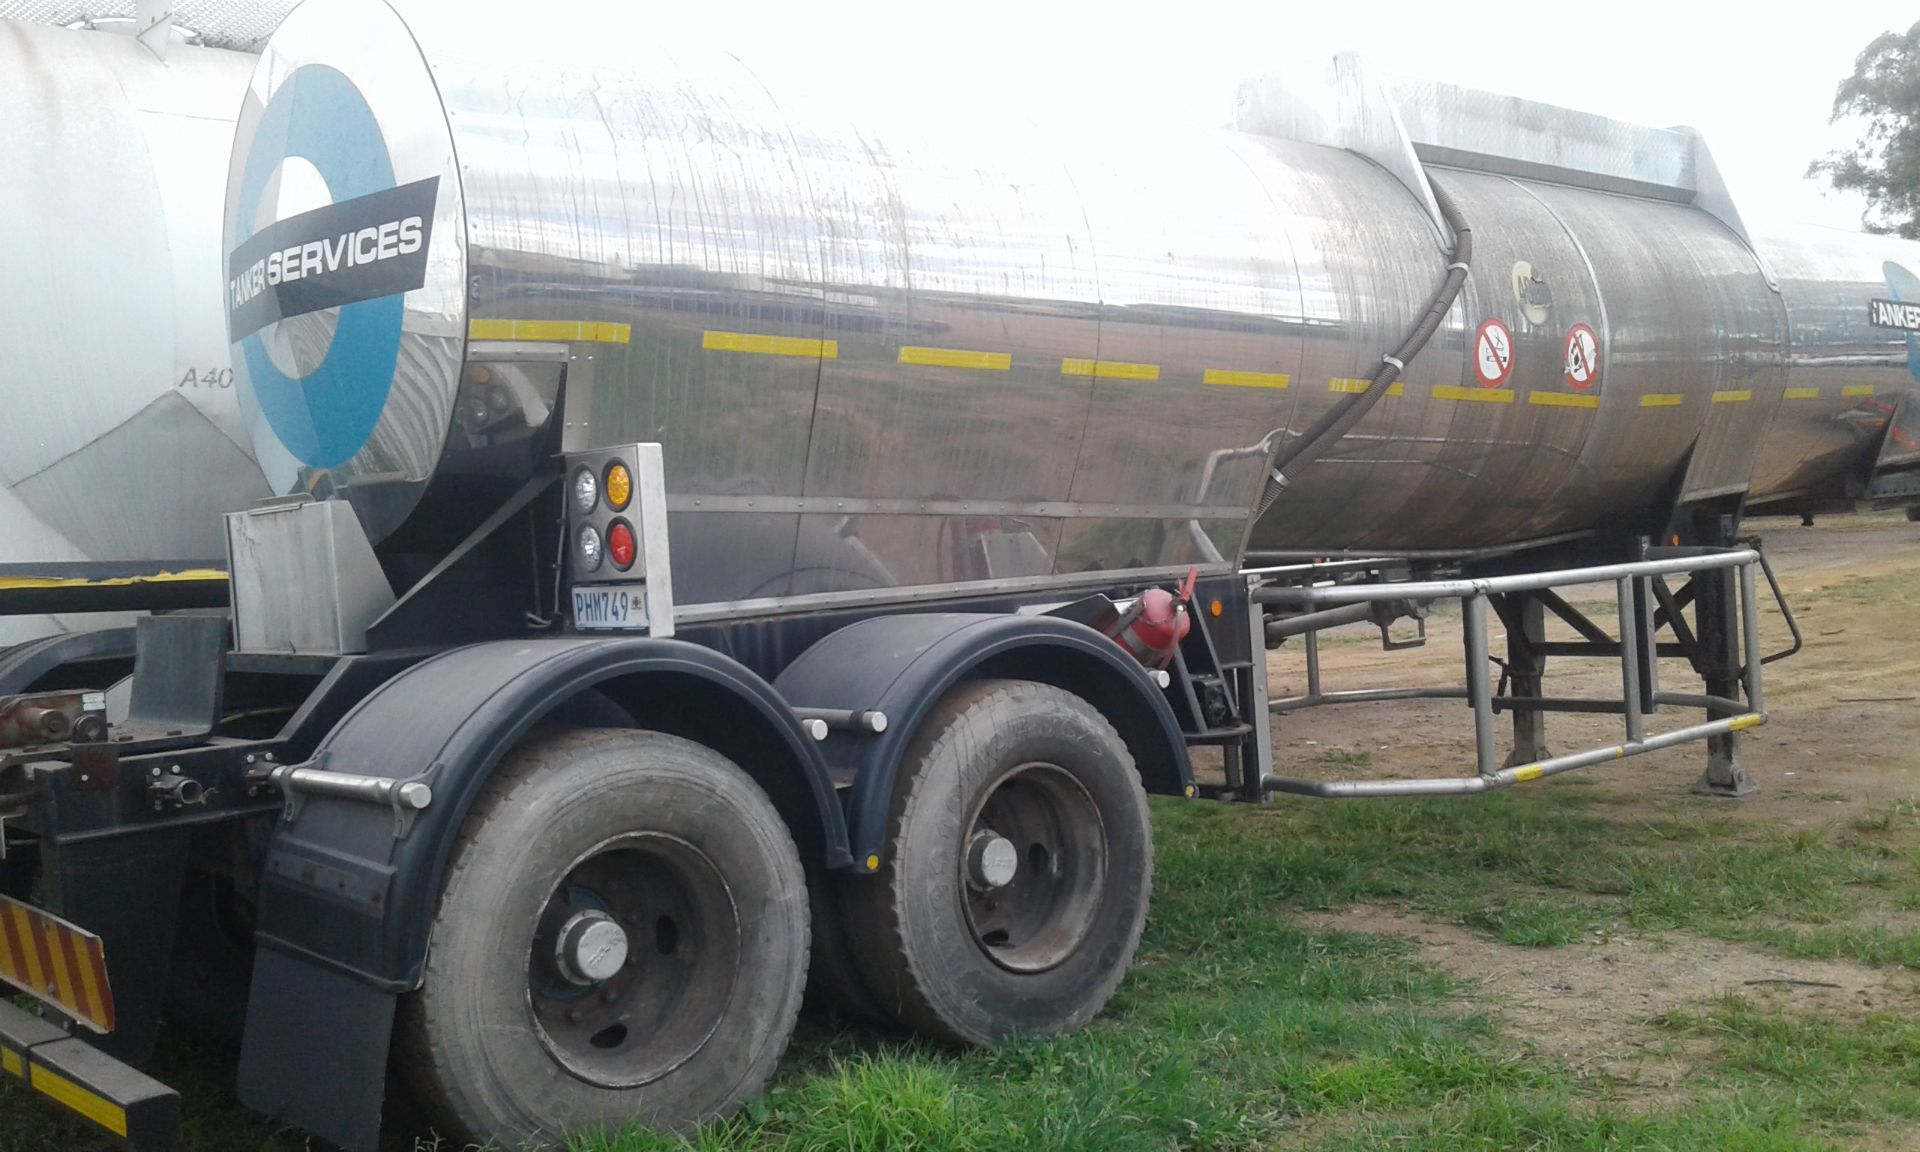 2003 GRW DOUBLE AXLE STAINLESS STEEL TANKER TRAILER - (PHM749GP) - Image 2 of 4